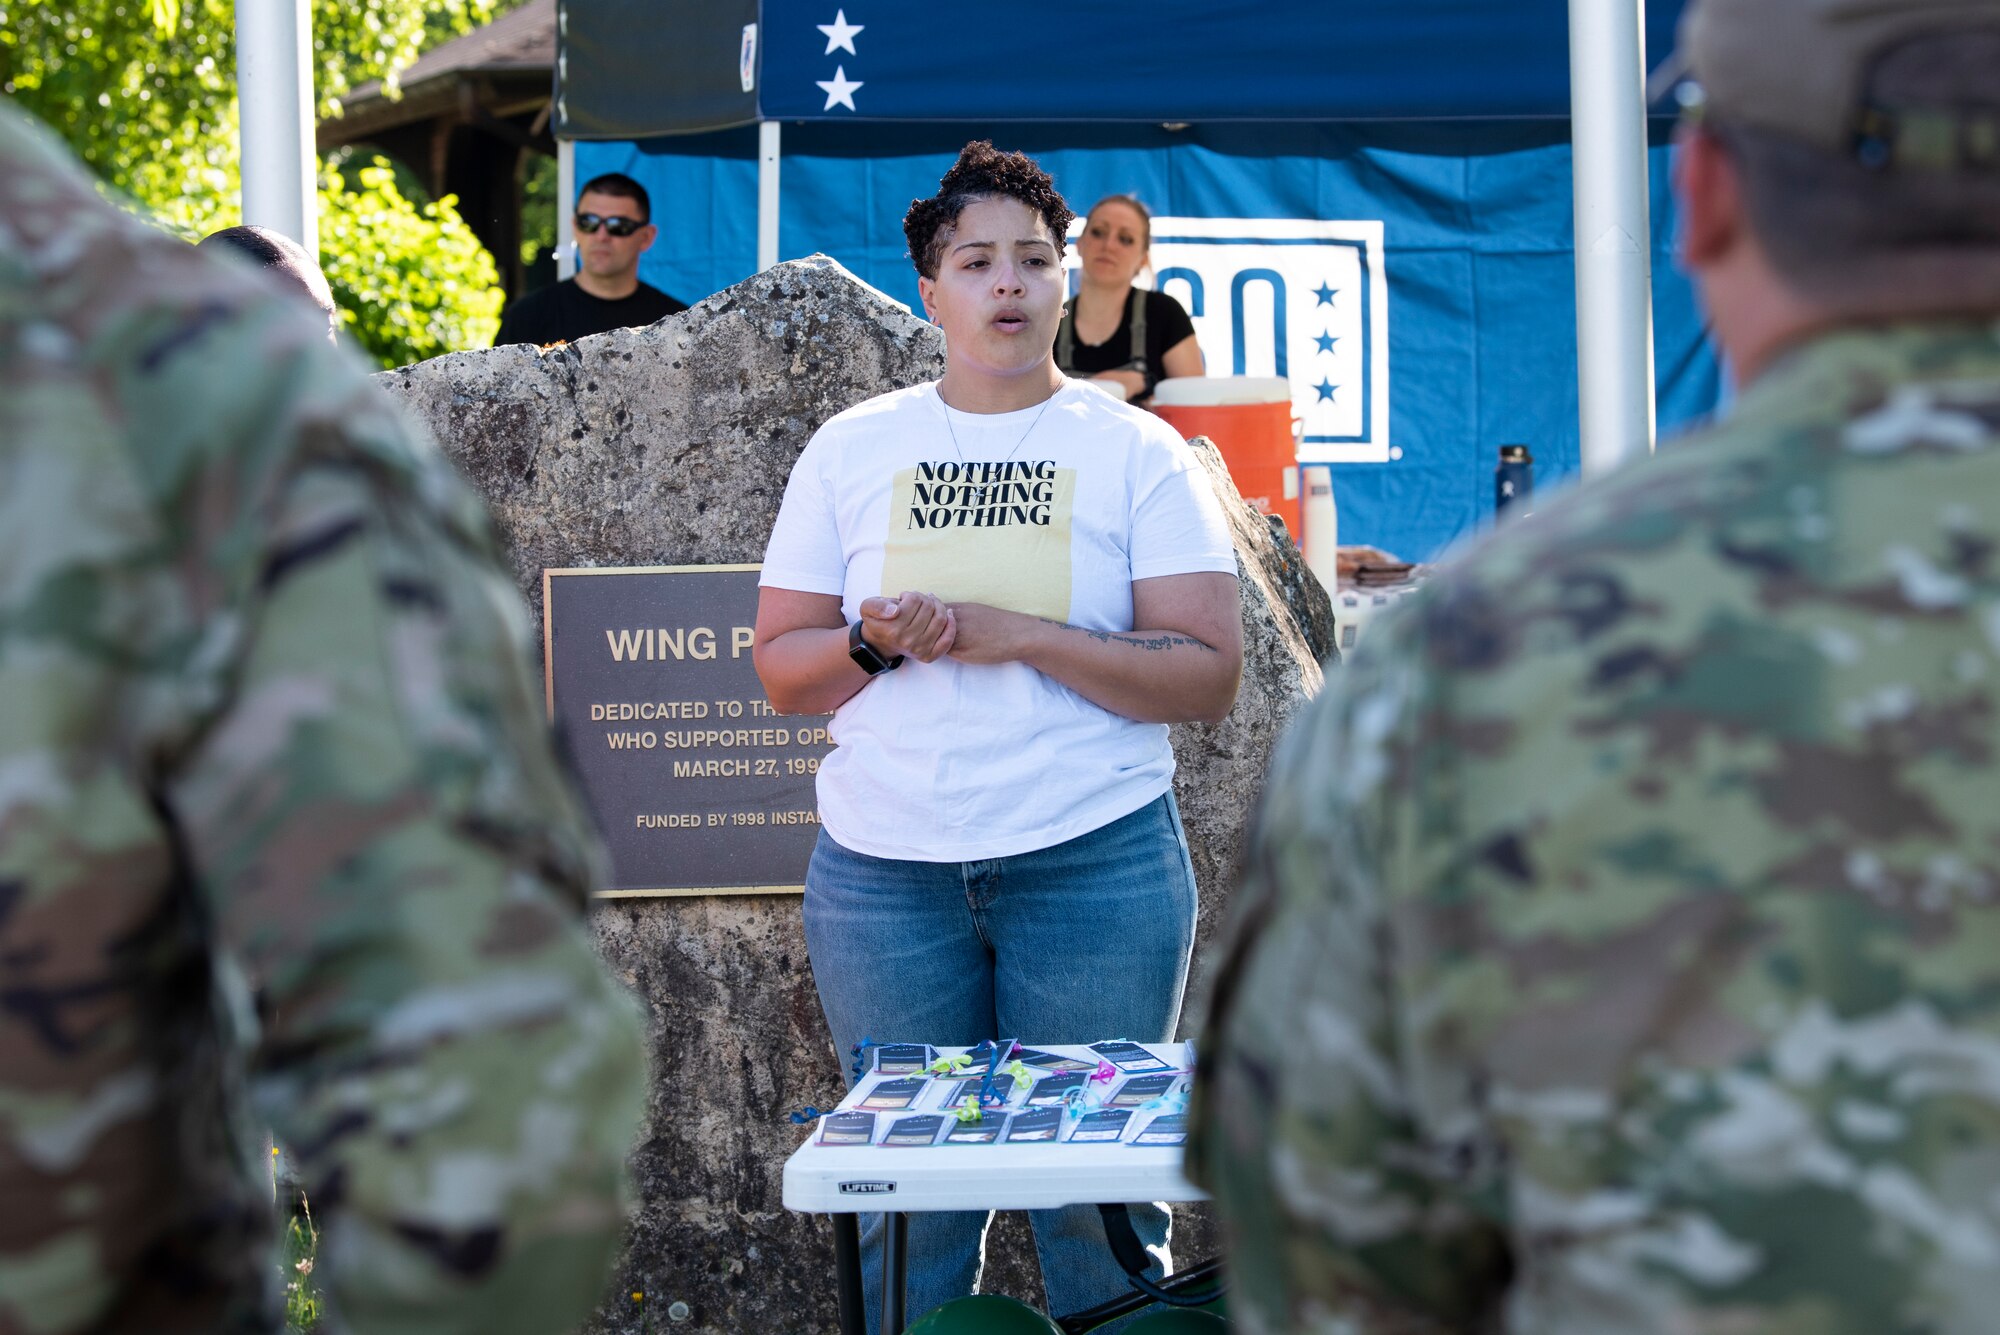 52 FW participates in a Juneteenth observance event